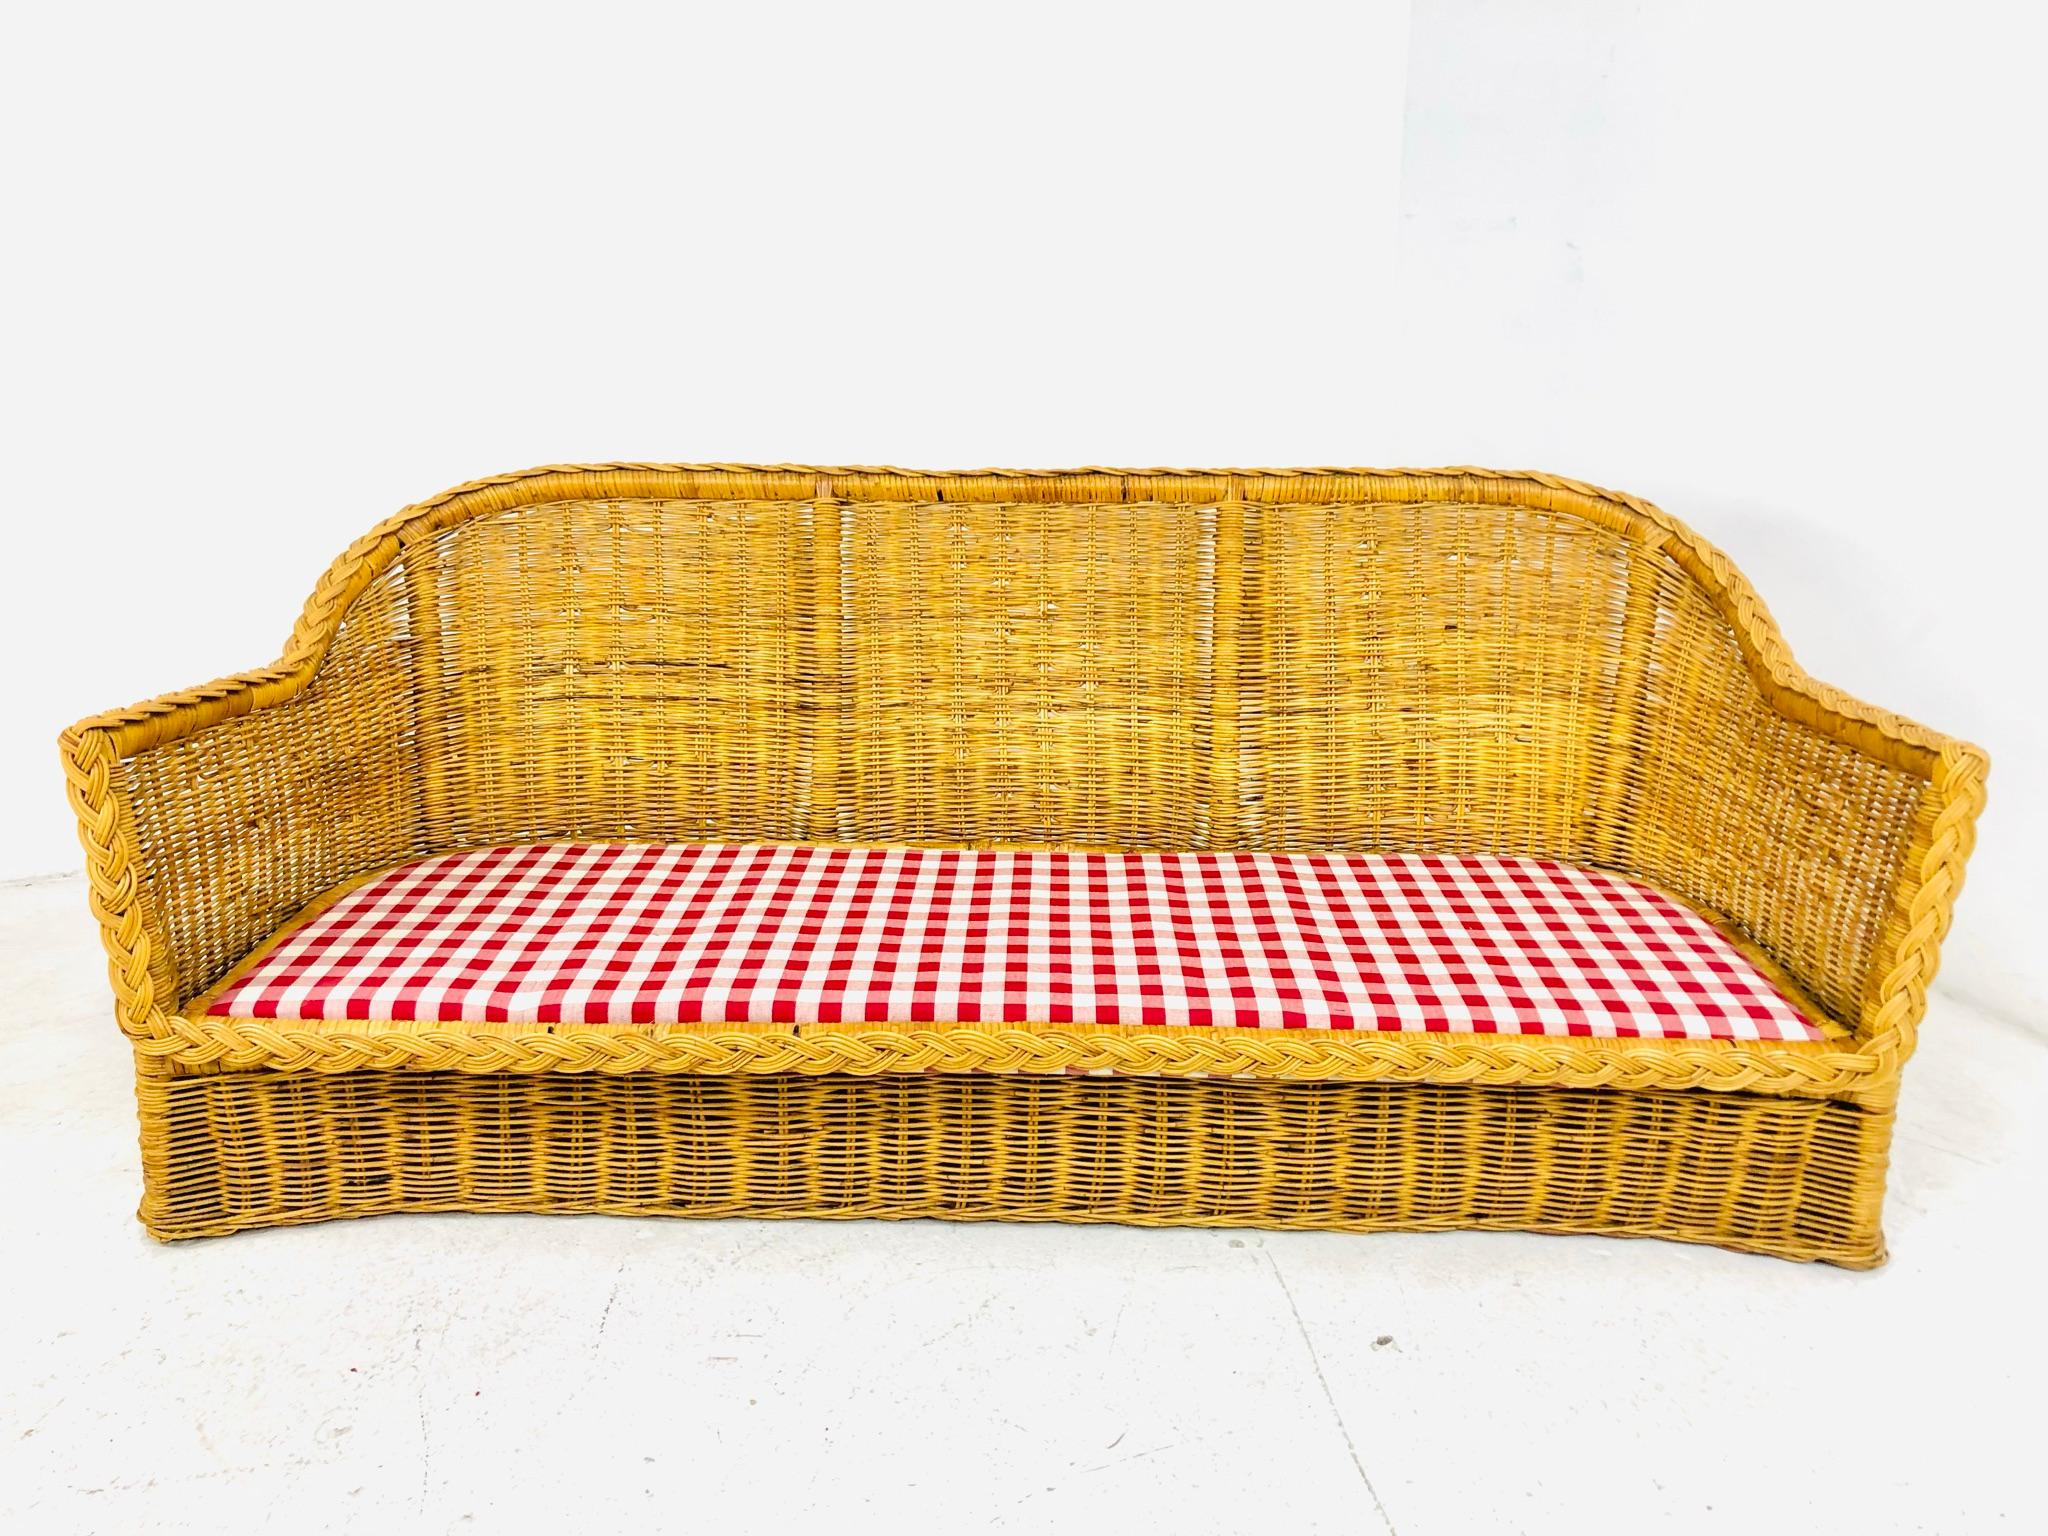 Braided Rattan Living Room Set by Wicker Works 7